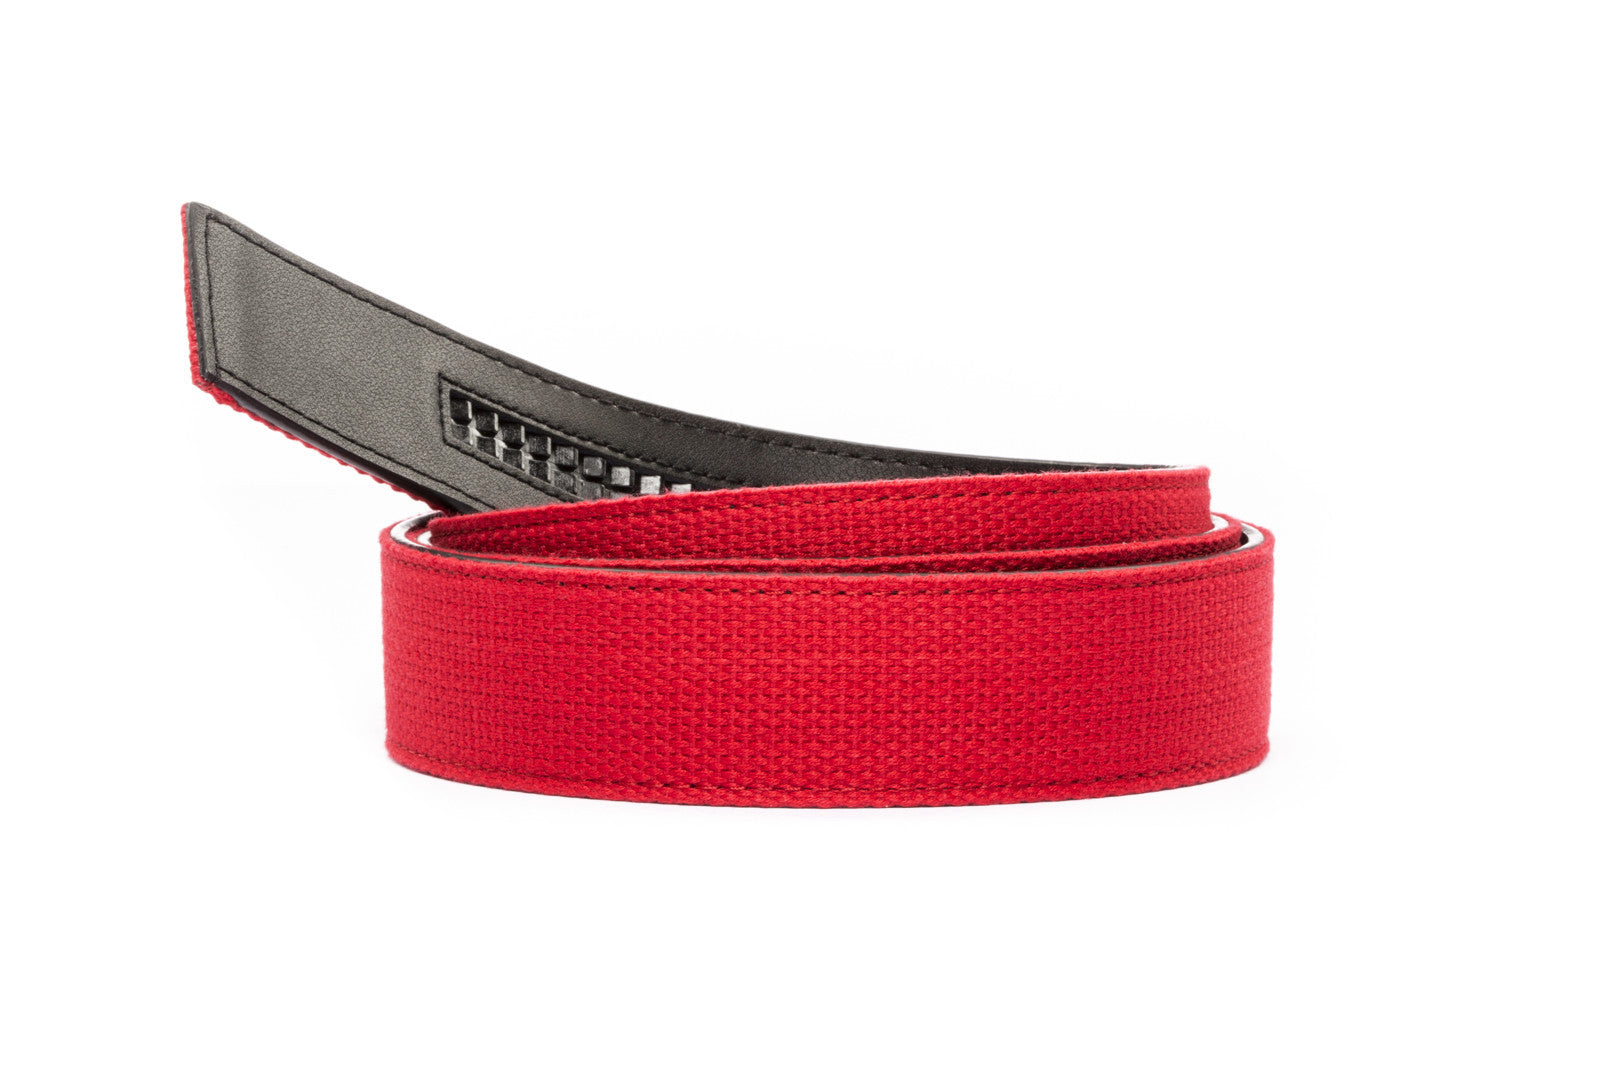 Men's canvas belt strap in red, 1.5 inches wide, casual look, microfiber back